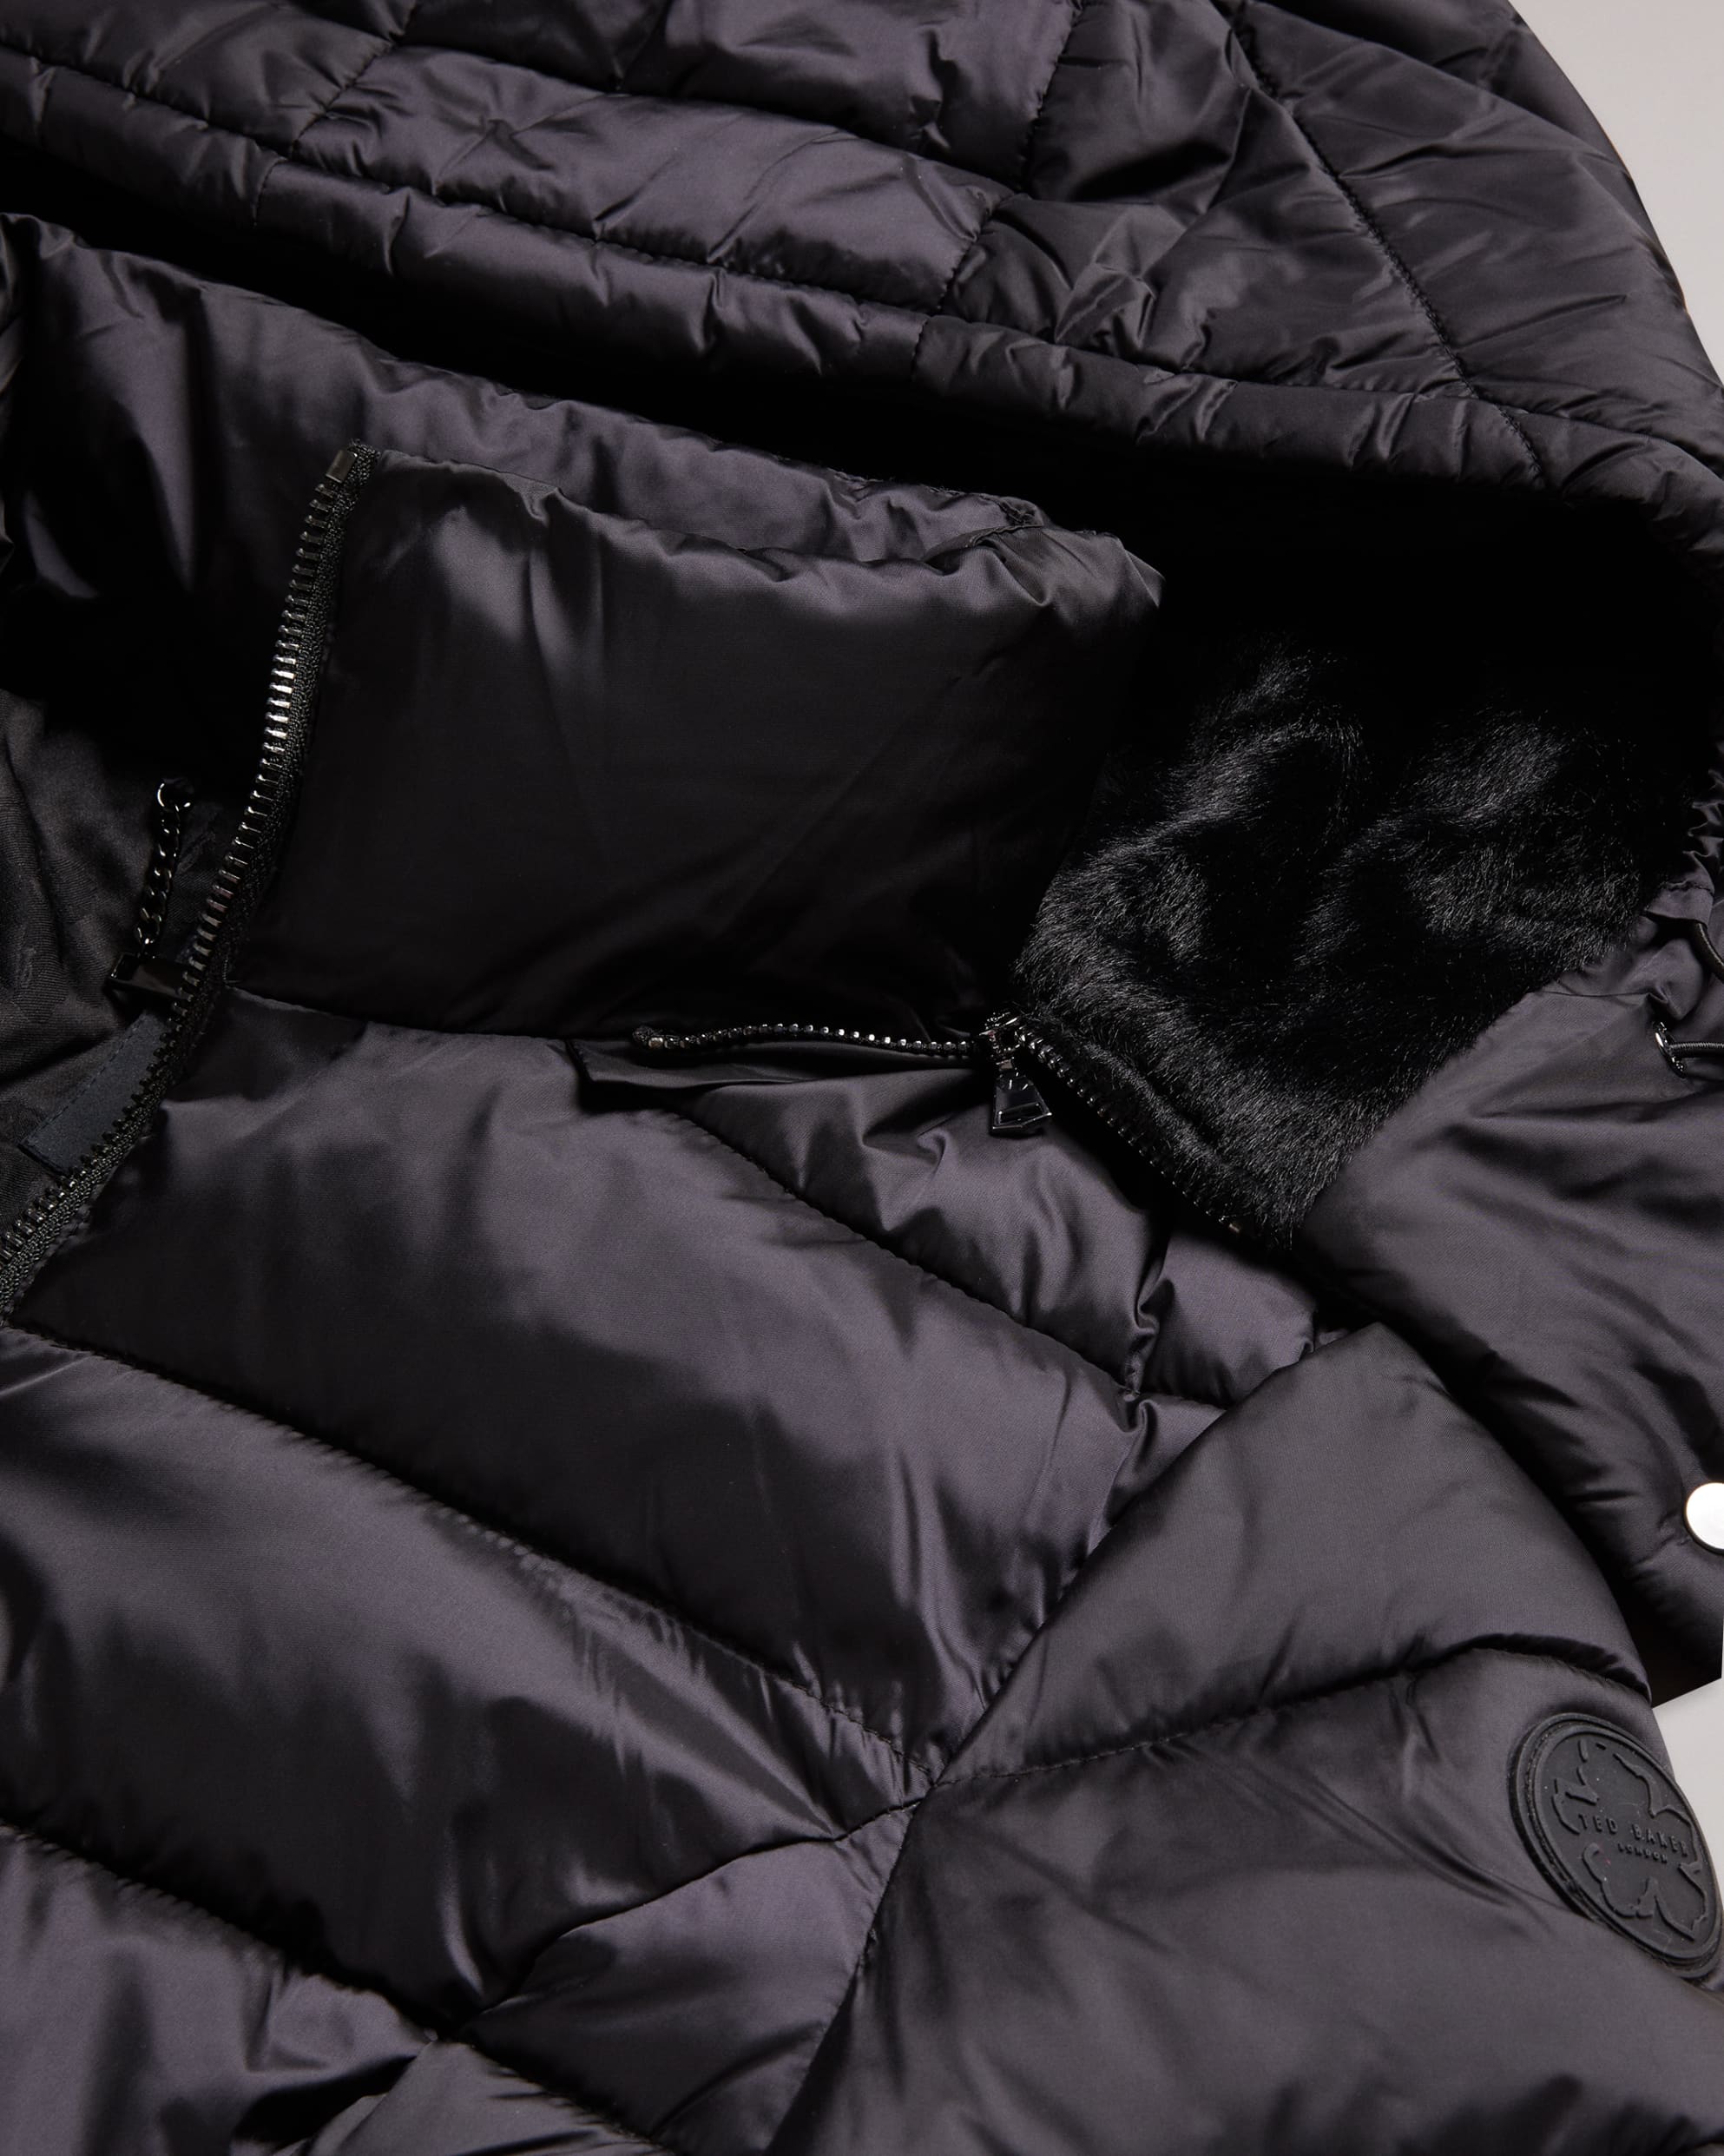 Abbiiee Belted Padded Coat With Detachable Hood Black